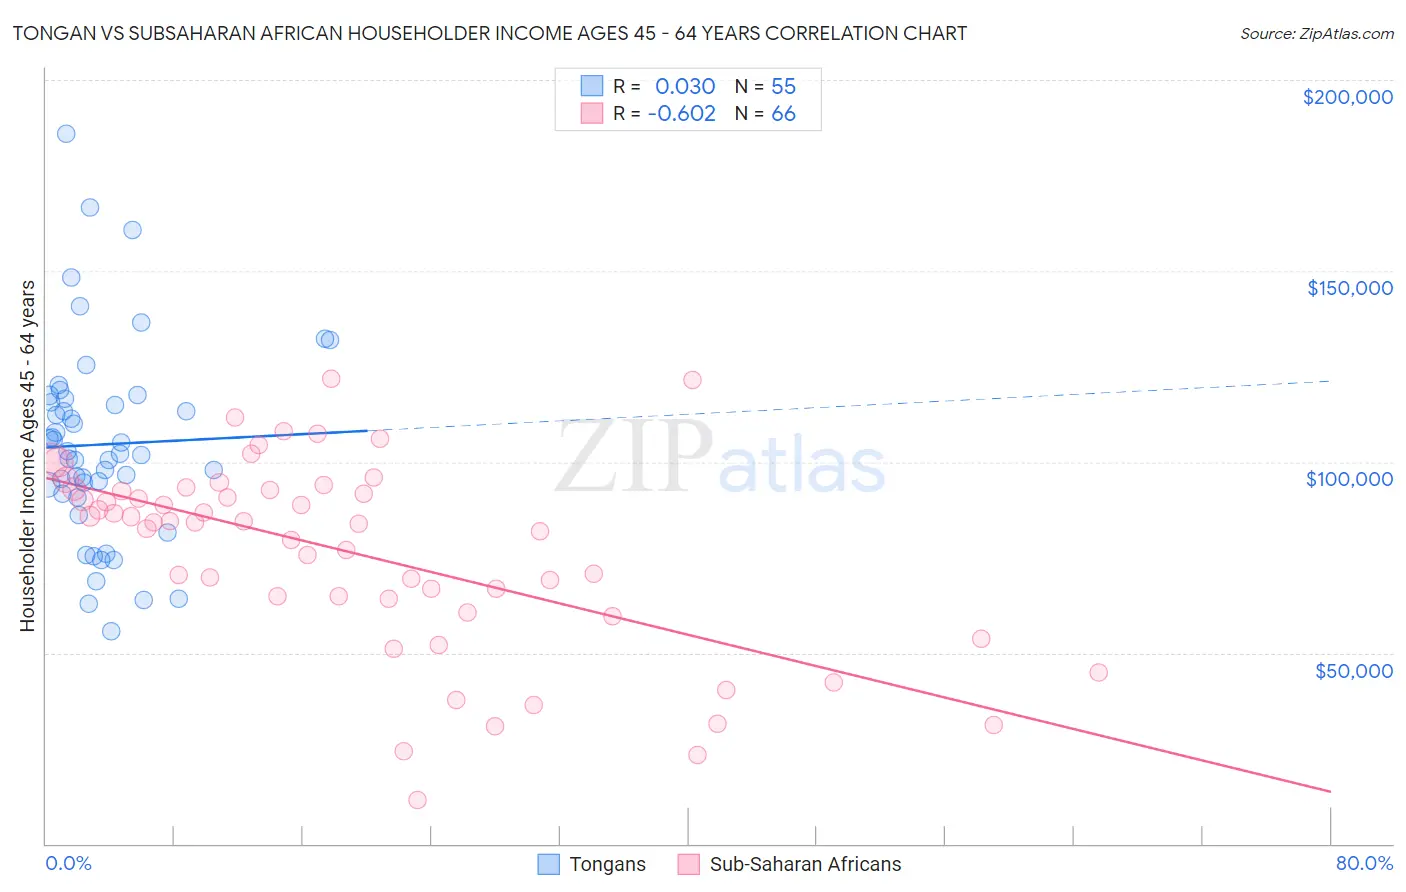 Tongan vs Subsaharan African Householder Income Ages 45 - 64 years